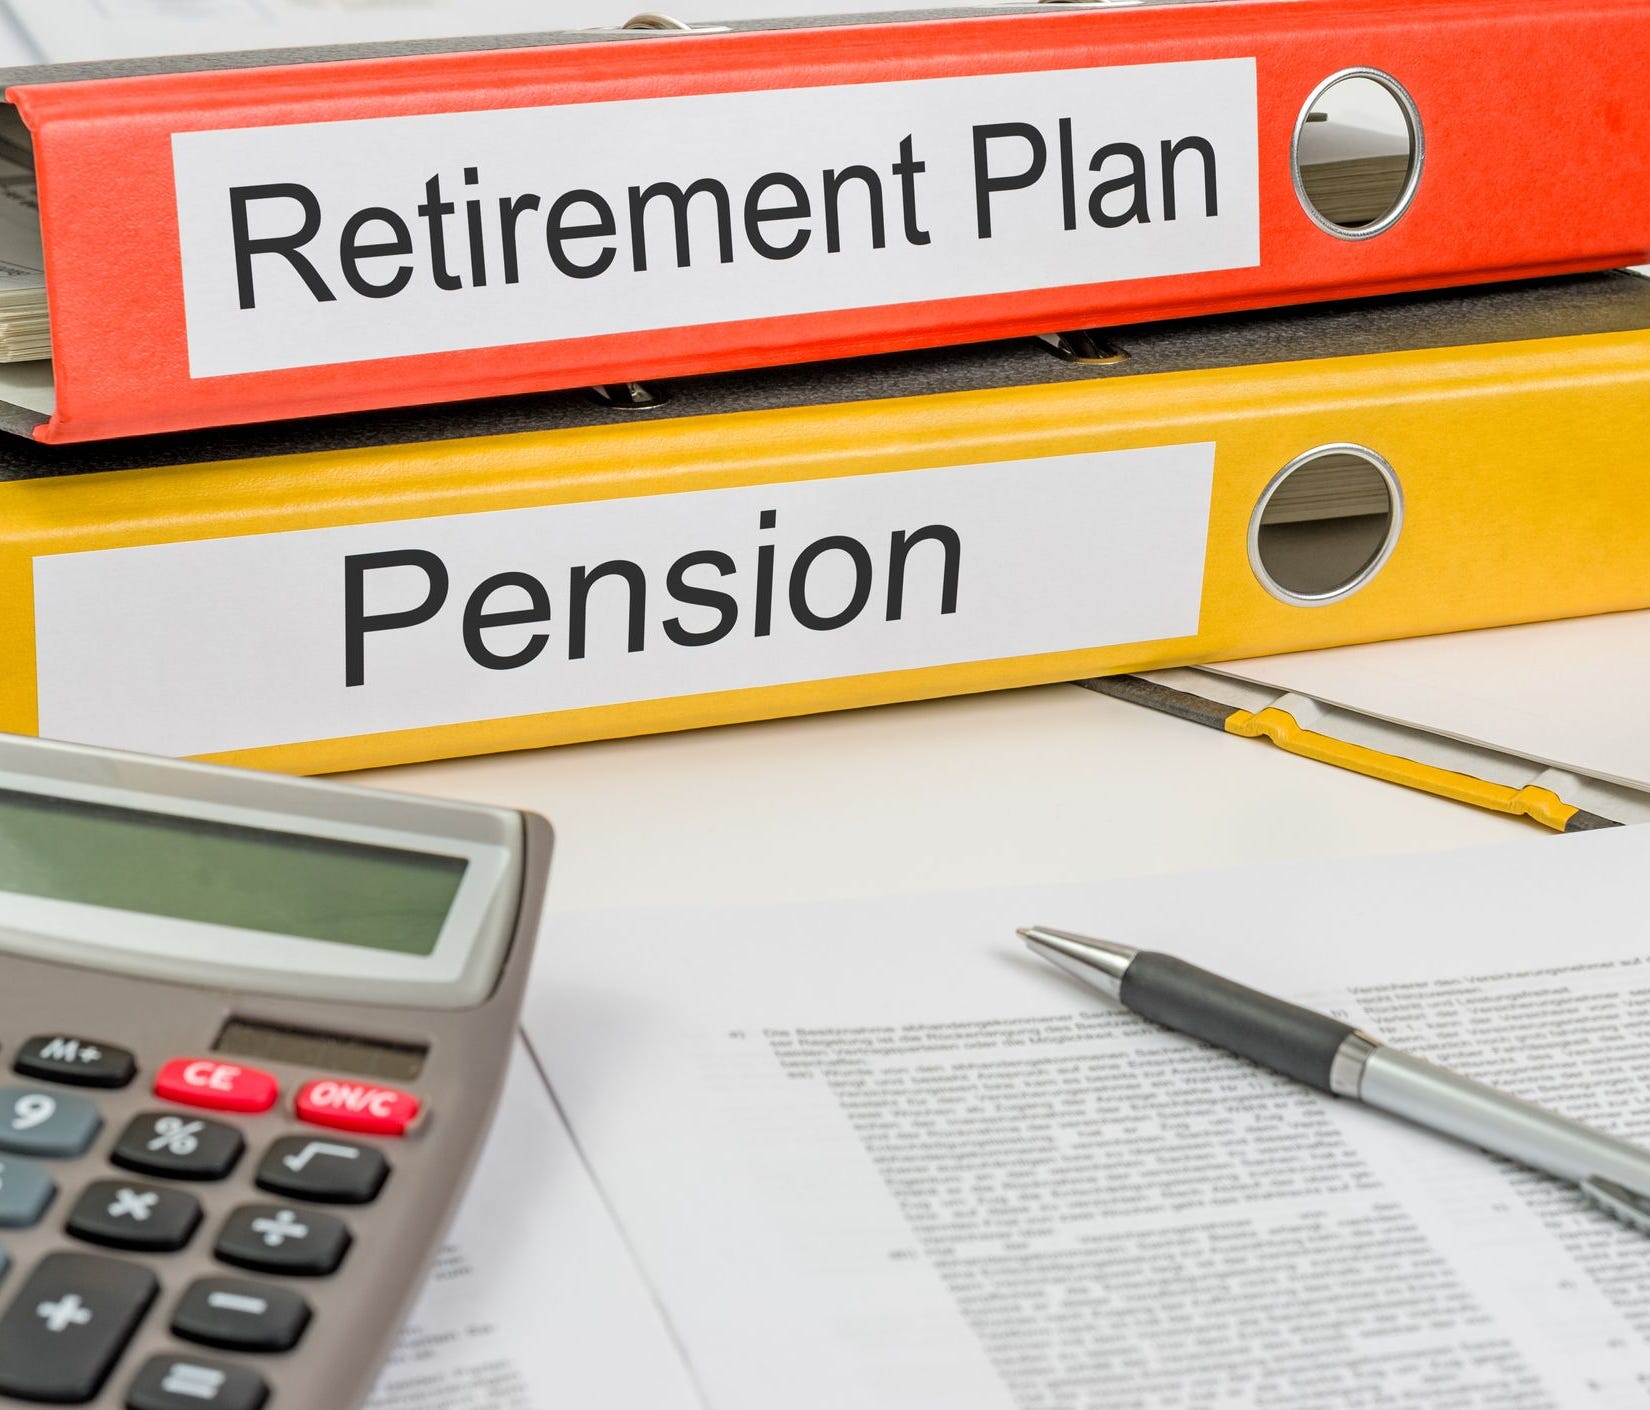 When choosing between job offers, the one that offers a pension along with the 401(k) plan is your best bet, even if the 401(k) match is less.